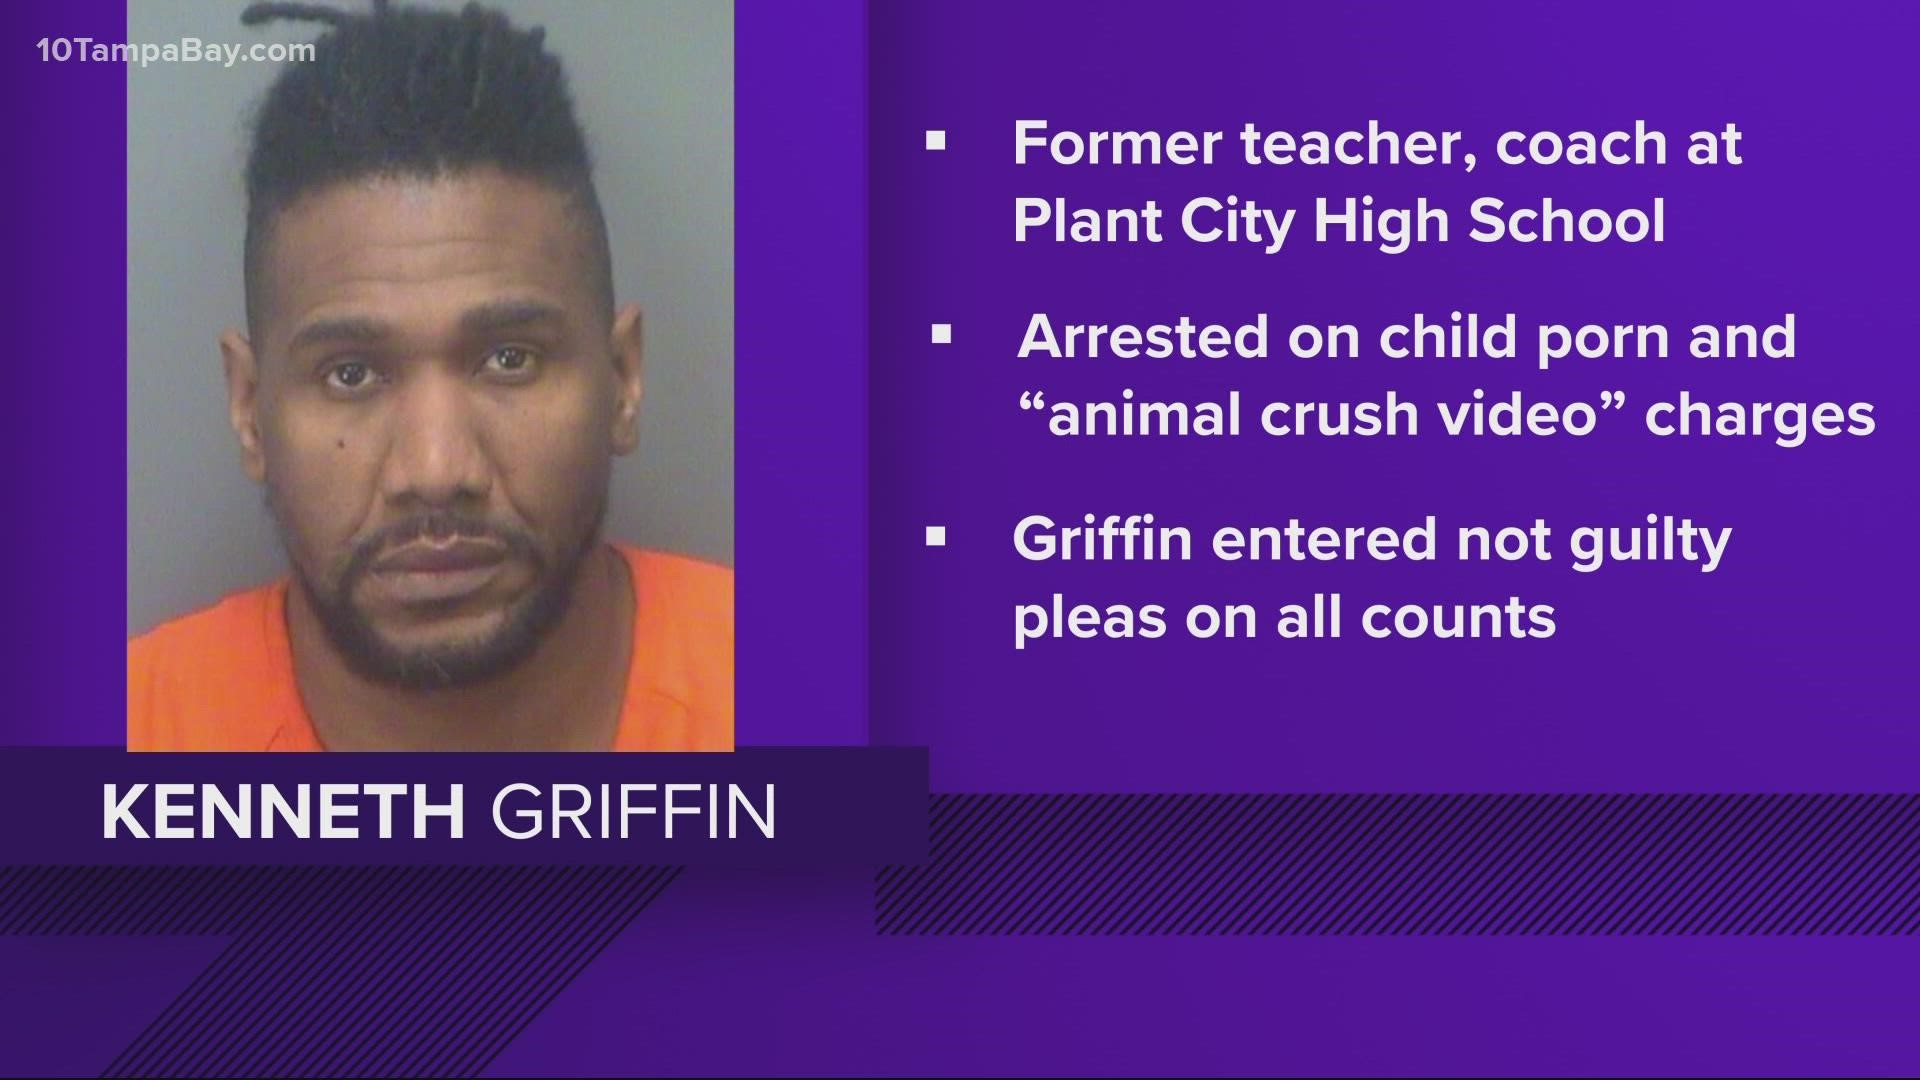 Kenneth Jermaine Griffin previously lost his Florida teaching certificate after being accused of sending explicit MySpace messages in January 2010 to a 15-year-old.